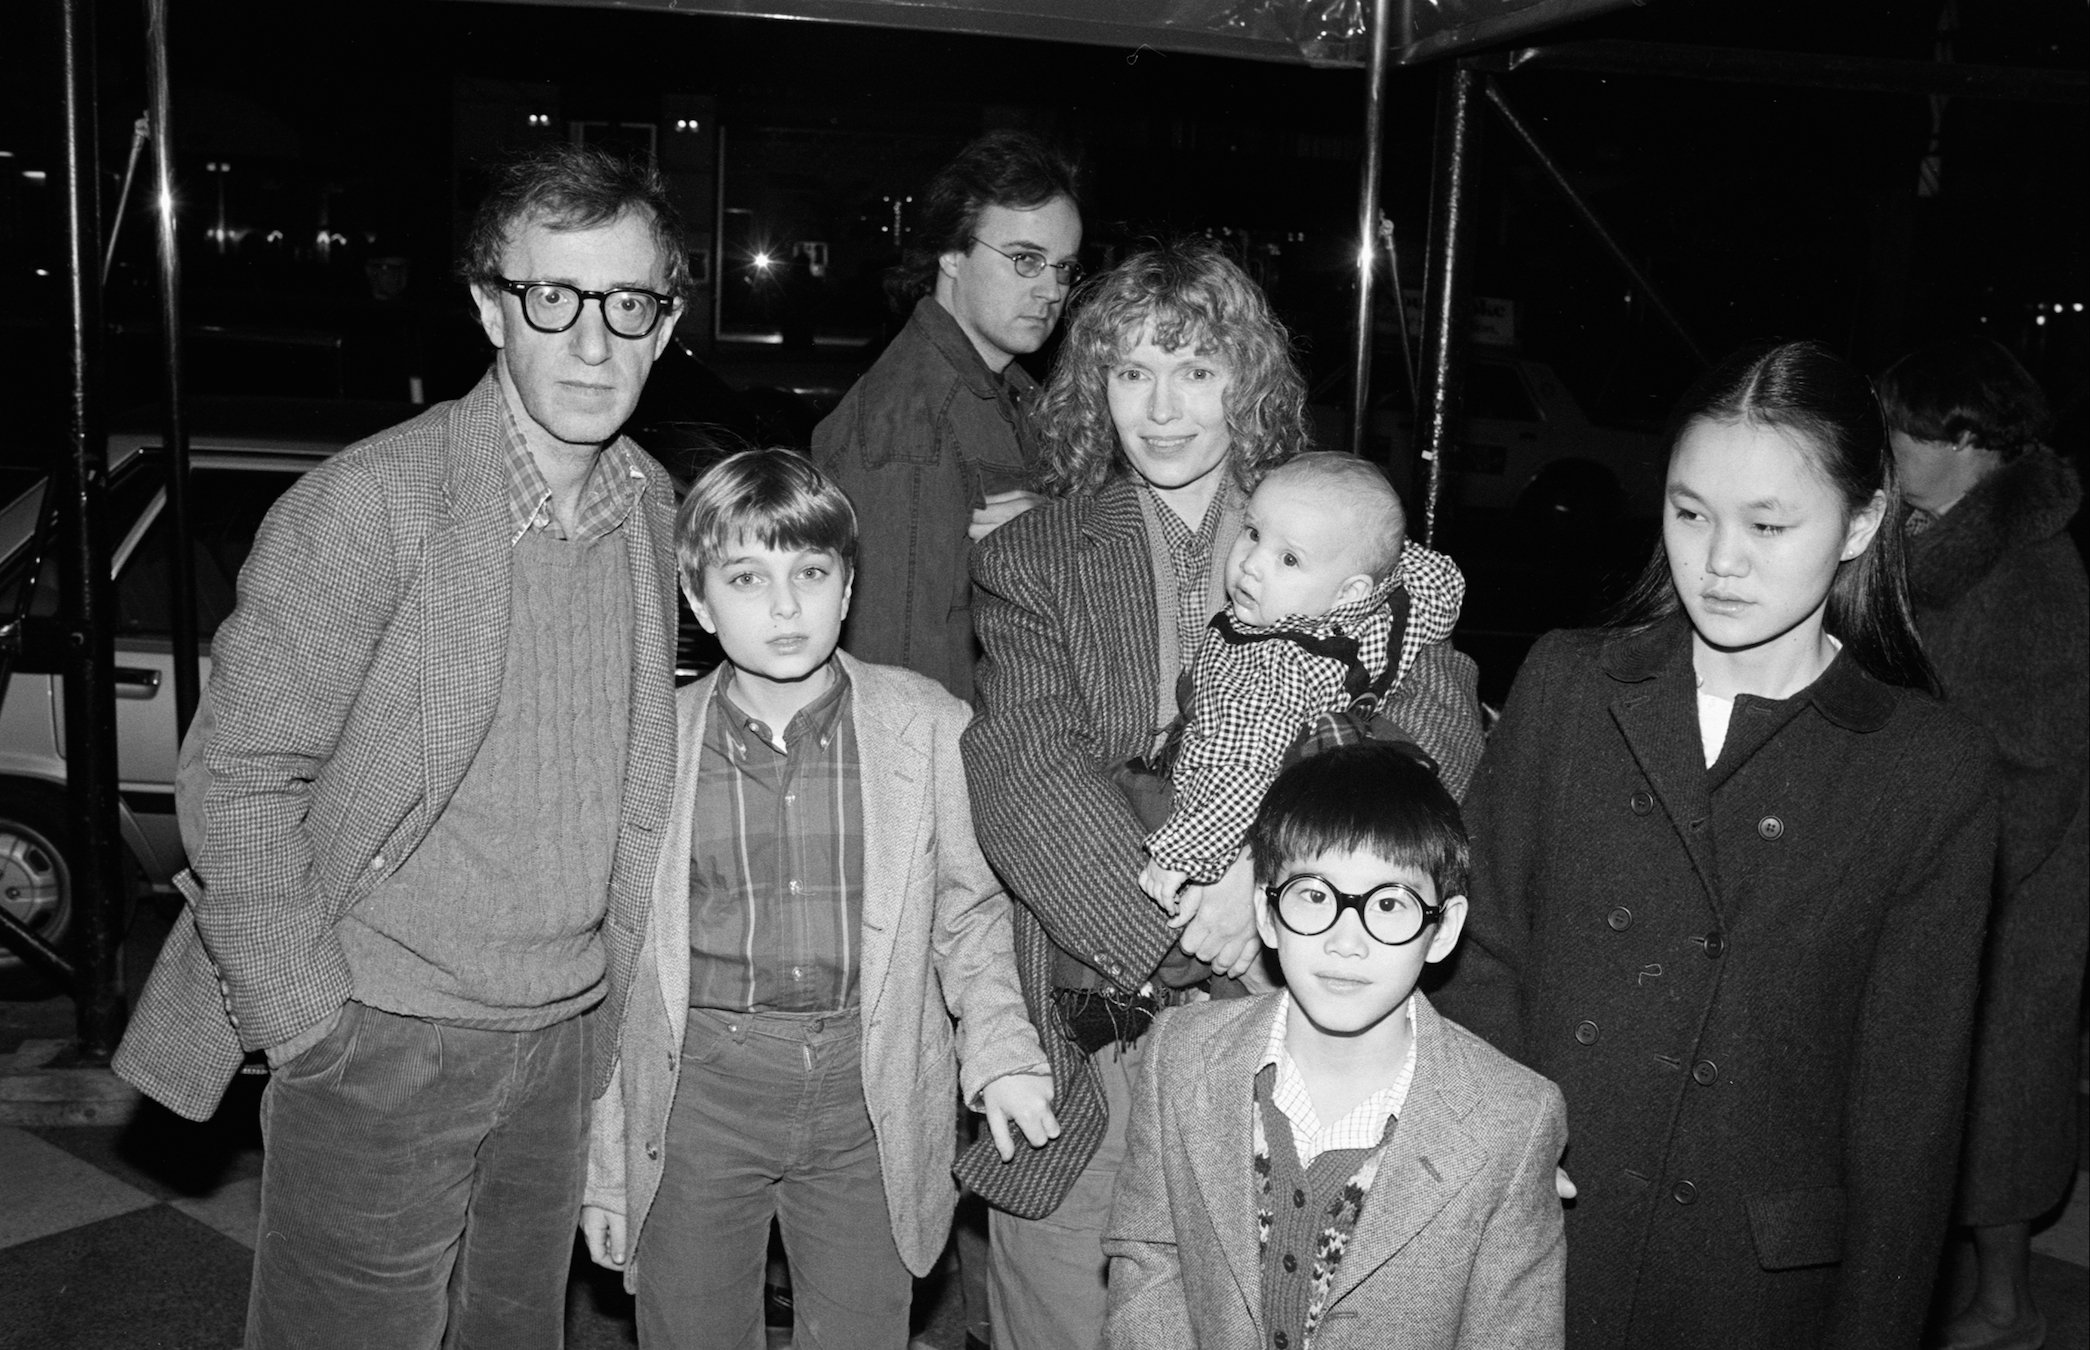 Woody Allen (left) and Mia Farrow pose under an awning with their children